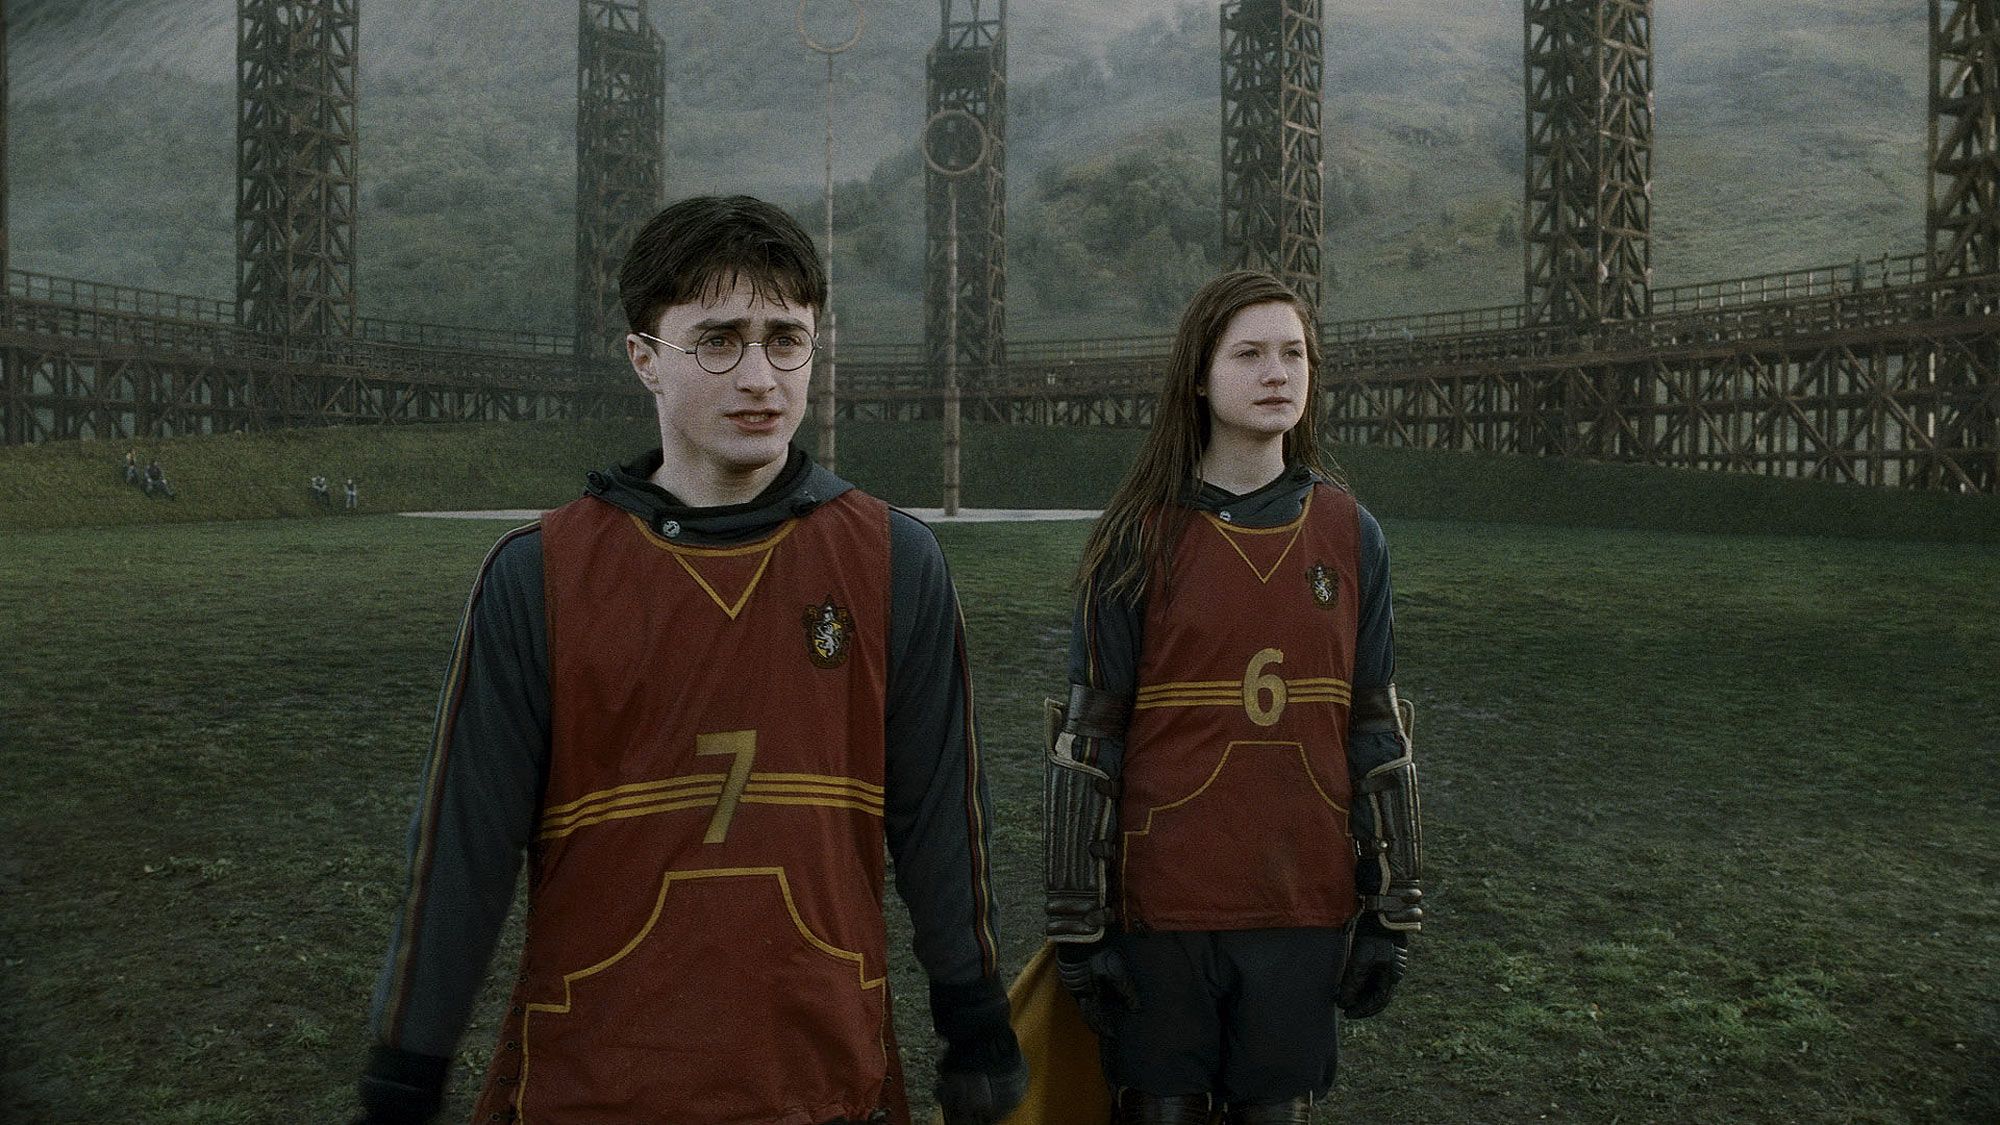 Daniel Radcliffe as Harry Potter and Bonnie Wright as Ginny Weasley